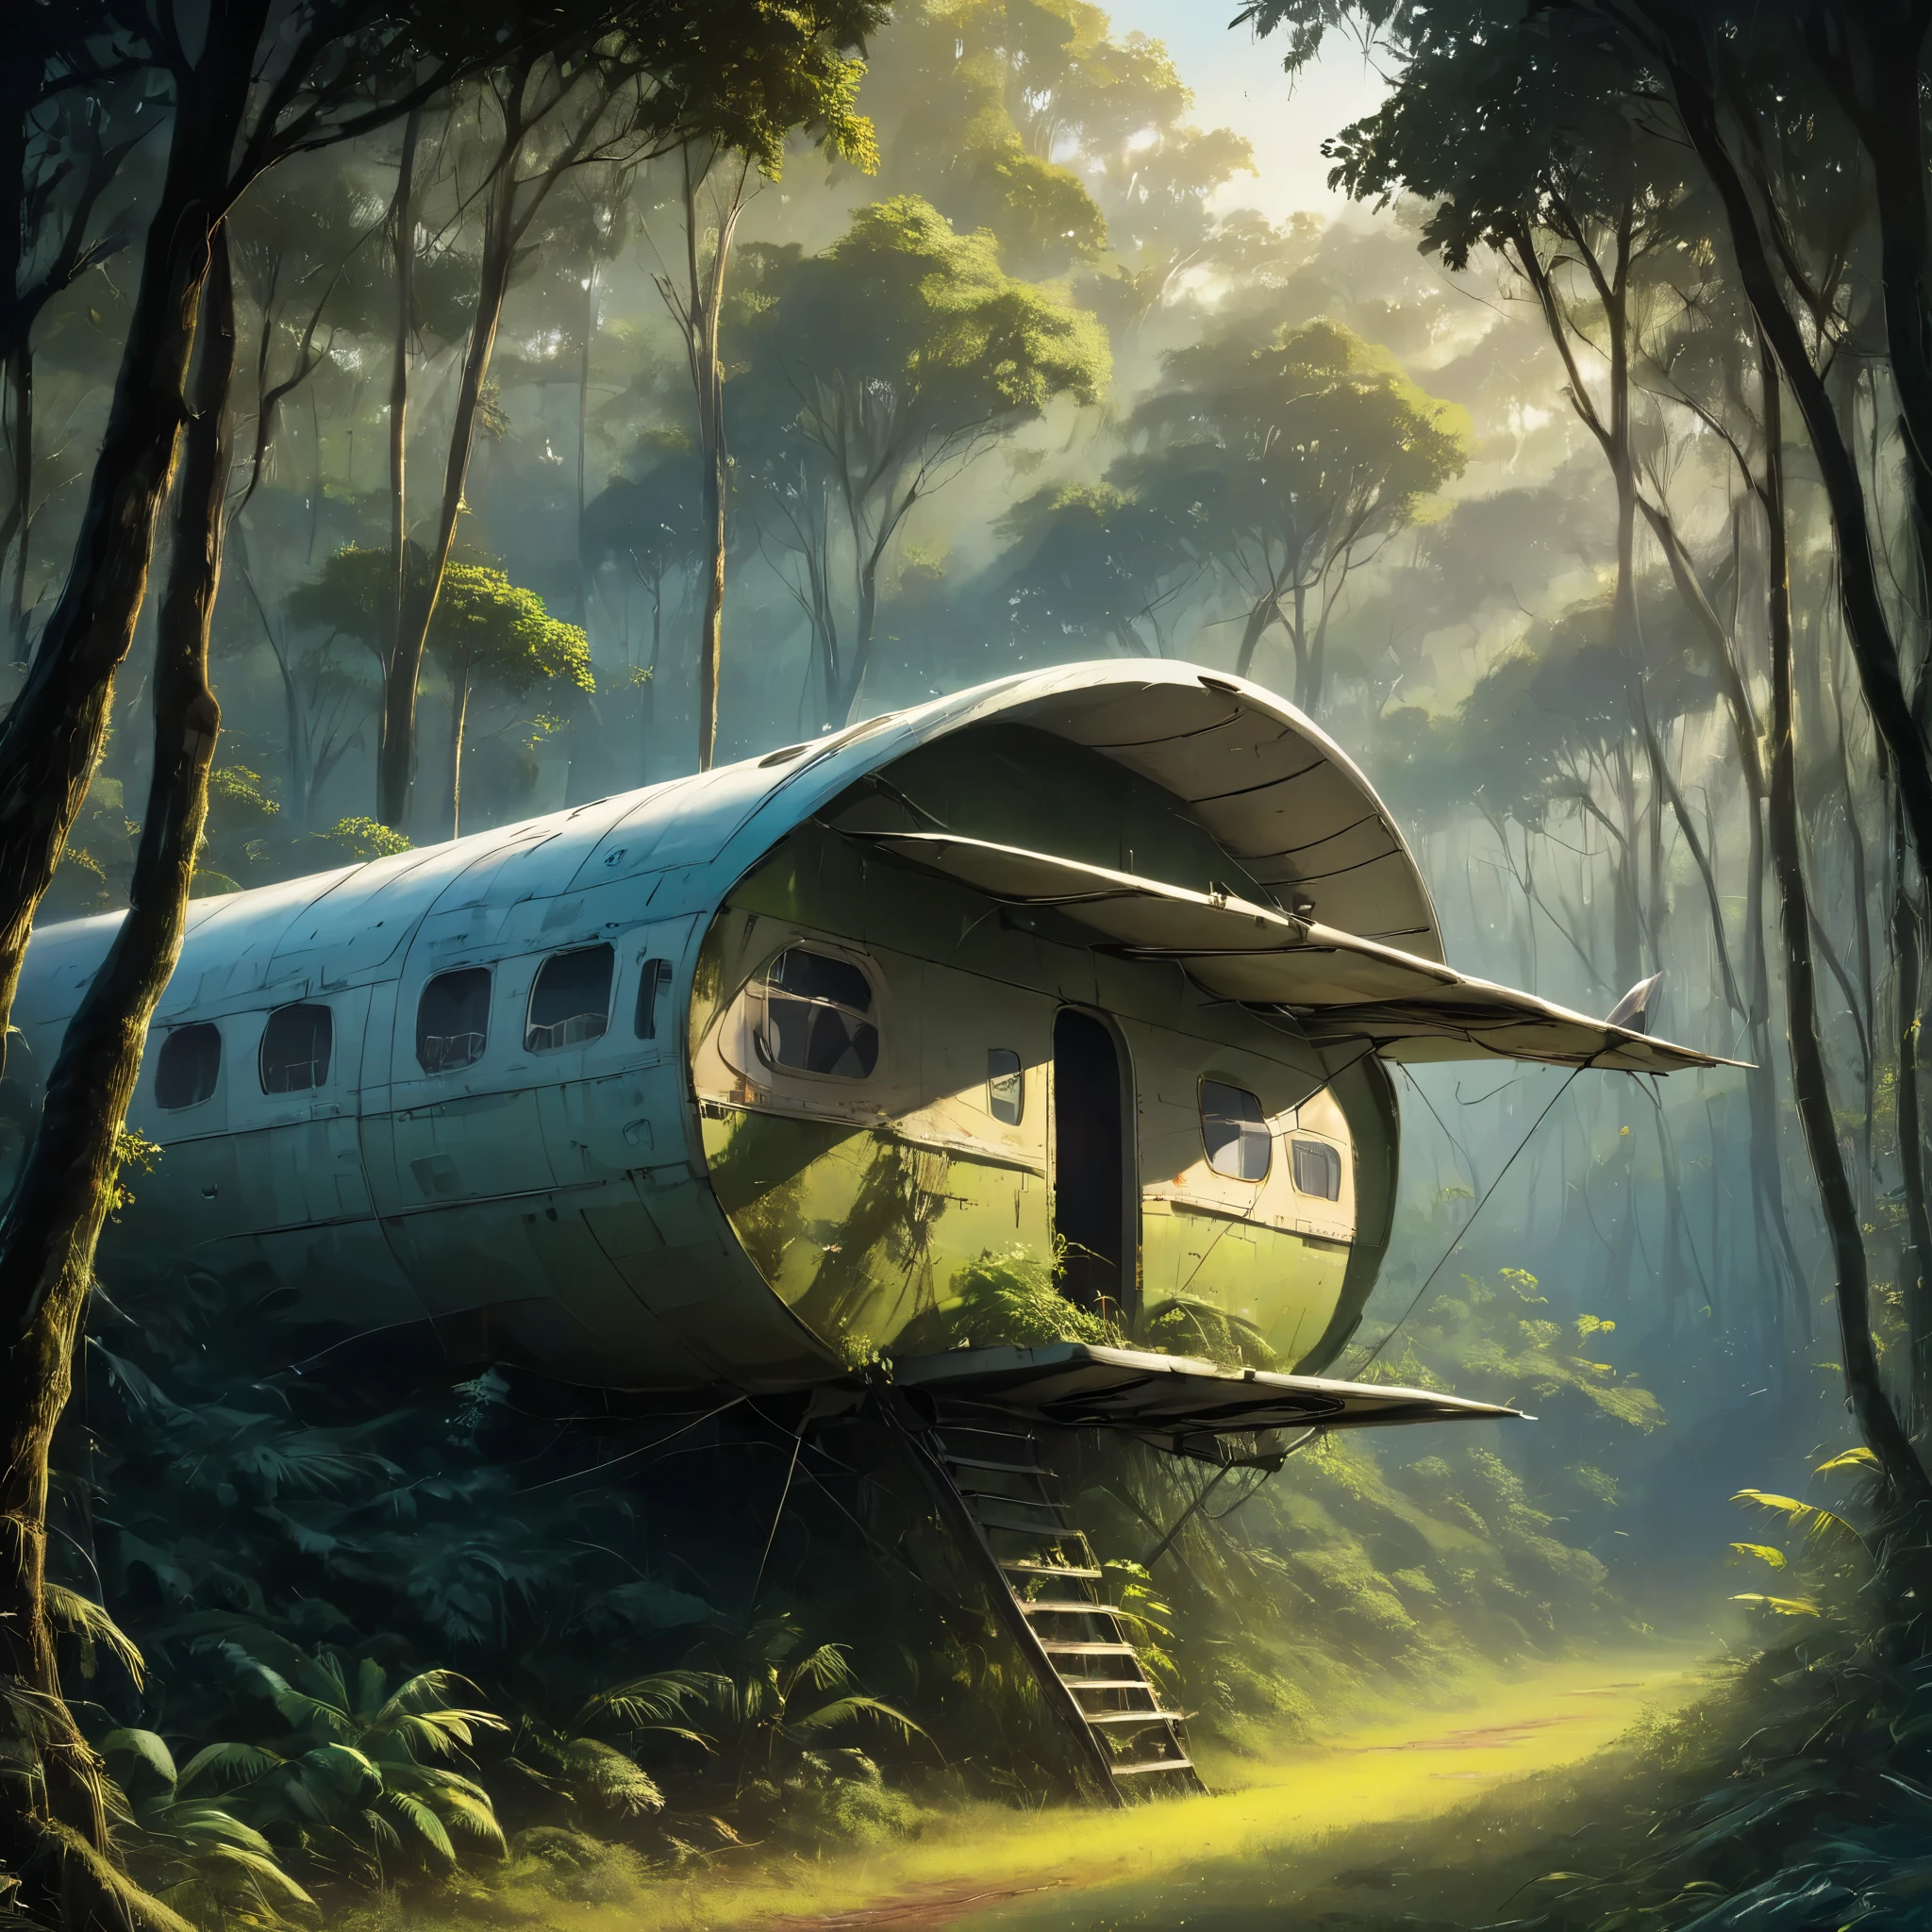 AN OLD USED AIRPLANE CABIN WITH SHELTER IN THE FOREST, A PICTURESQUE SCENE, WITH LIGHTS COMING THROUGH THE TREE CUP AND FINE FOG AROUND